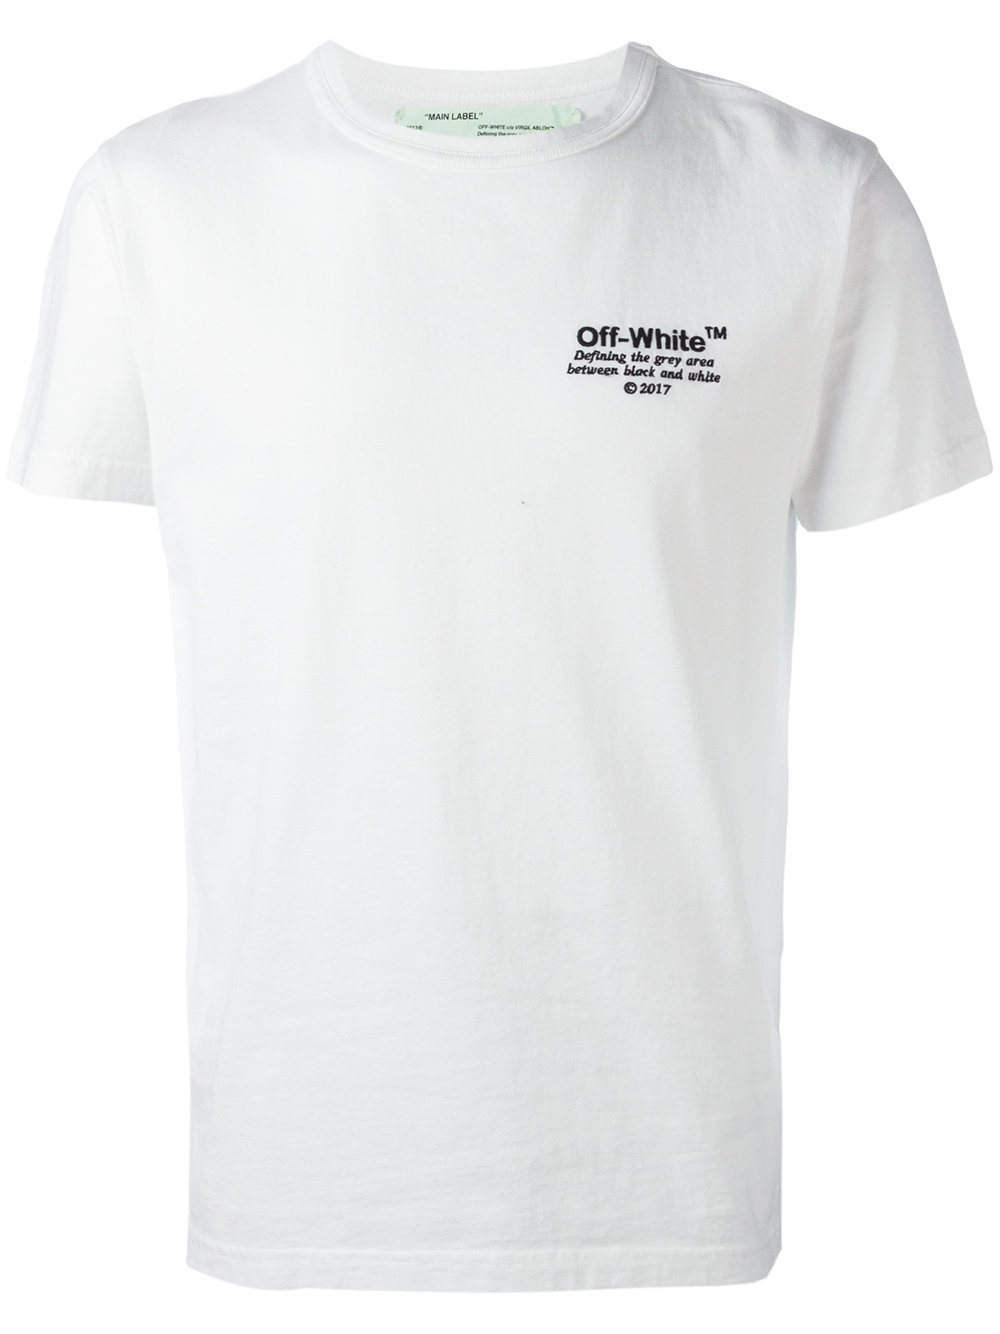 Off-White embroidered text T-shirt 0110 WHITE Men Clothing T-Shirts